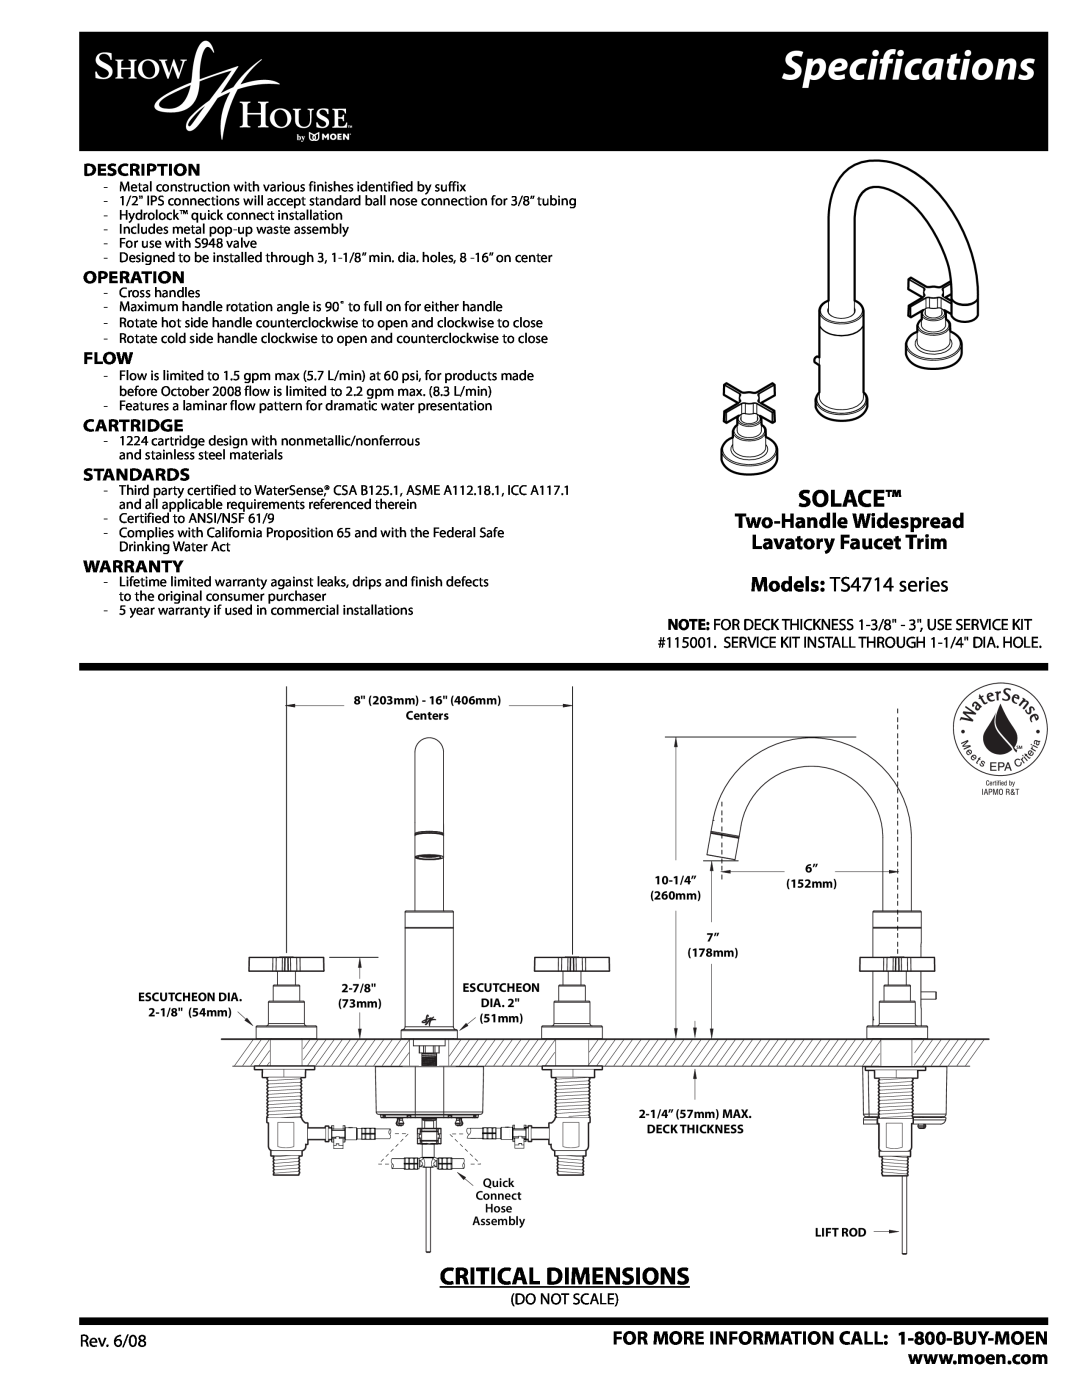 Moen TS4714 Series specifications Specifications, Solace, Critical Dimensions, Two-Handle Widespread Lavatory Faucet Trim 